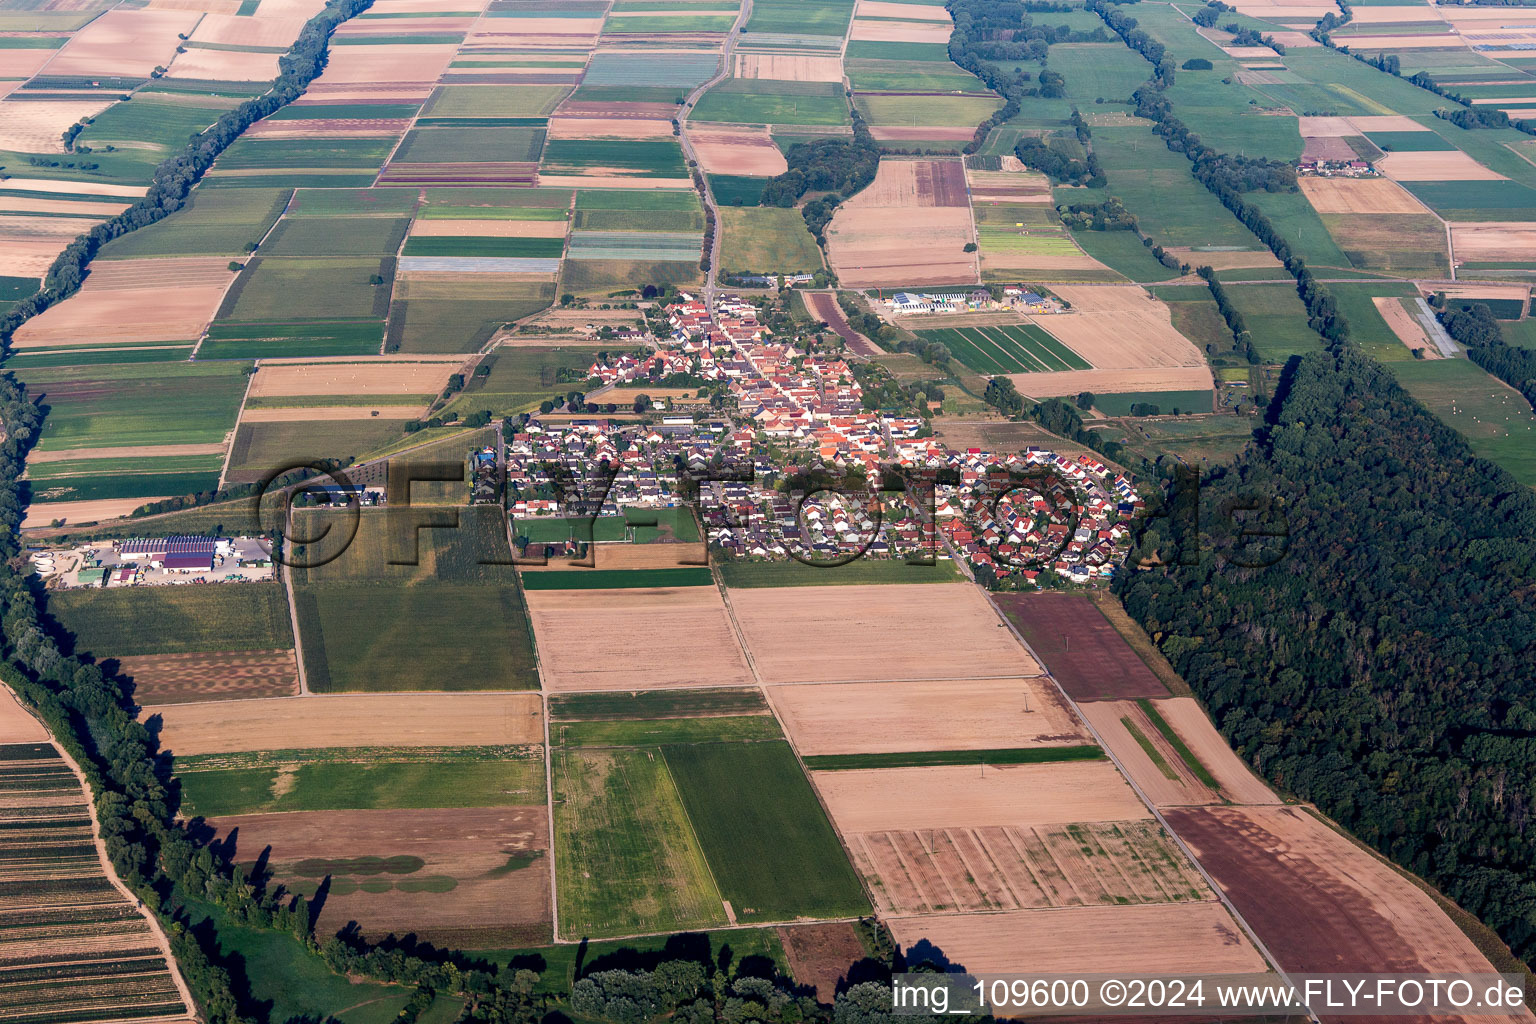 Agricultural land and field borders surround the settlement area of the village in Freisbach in the state Rhineland-Palatinate, Germany from the plane